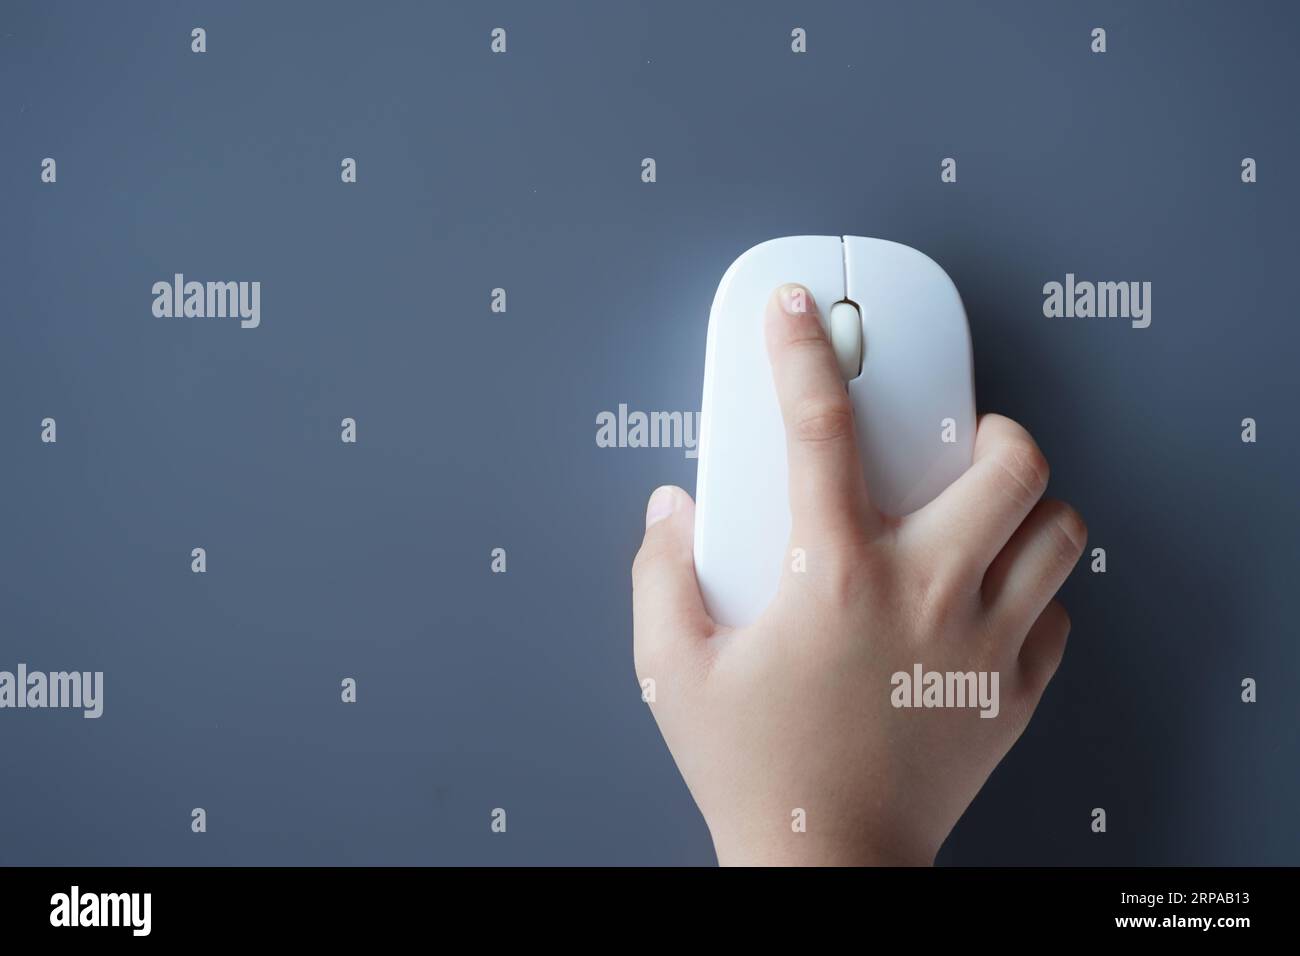 Top view image of small kid's hand using computer mouse. Copy space for text. Technology concept Stock Photo